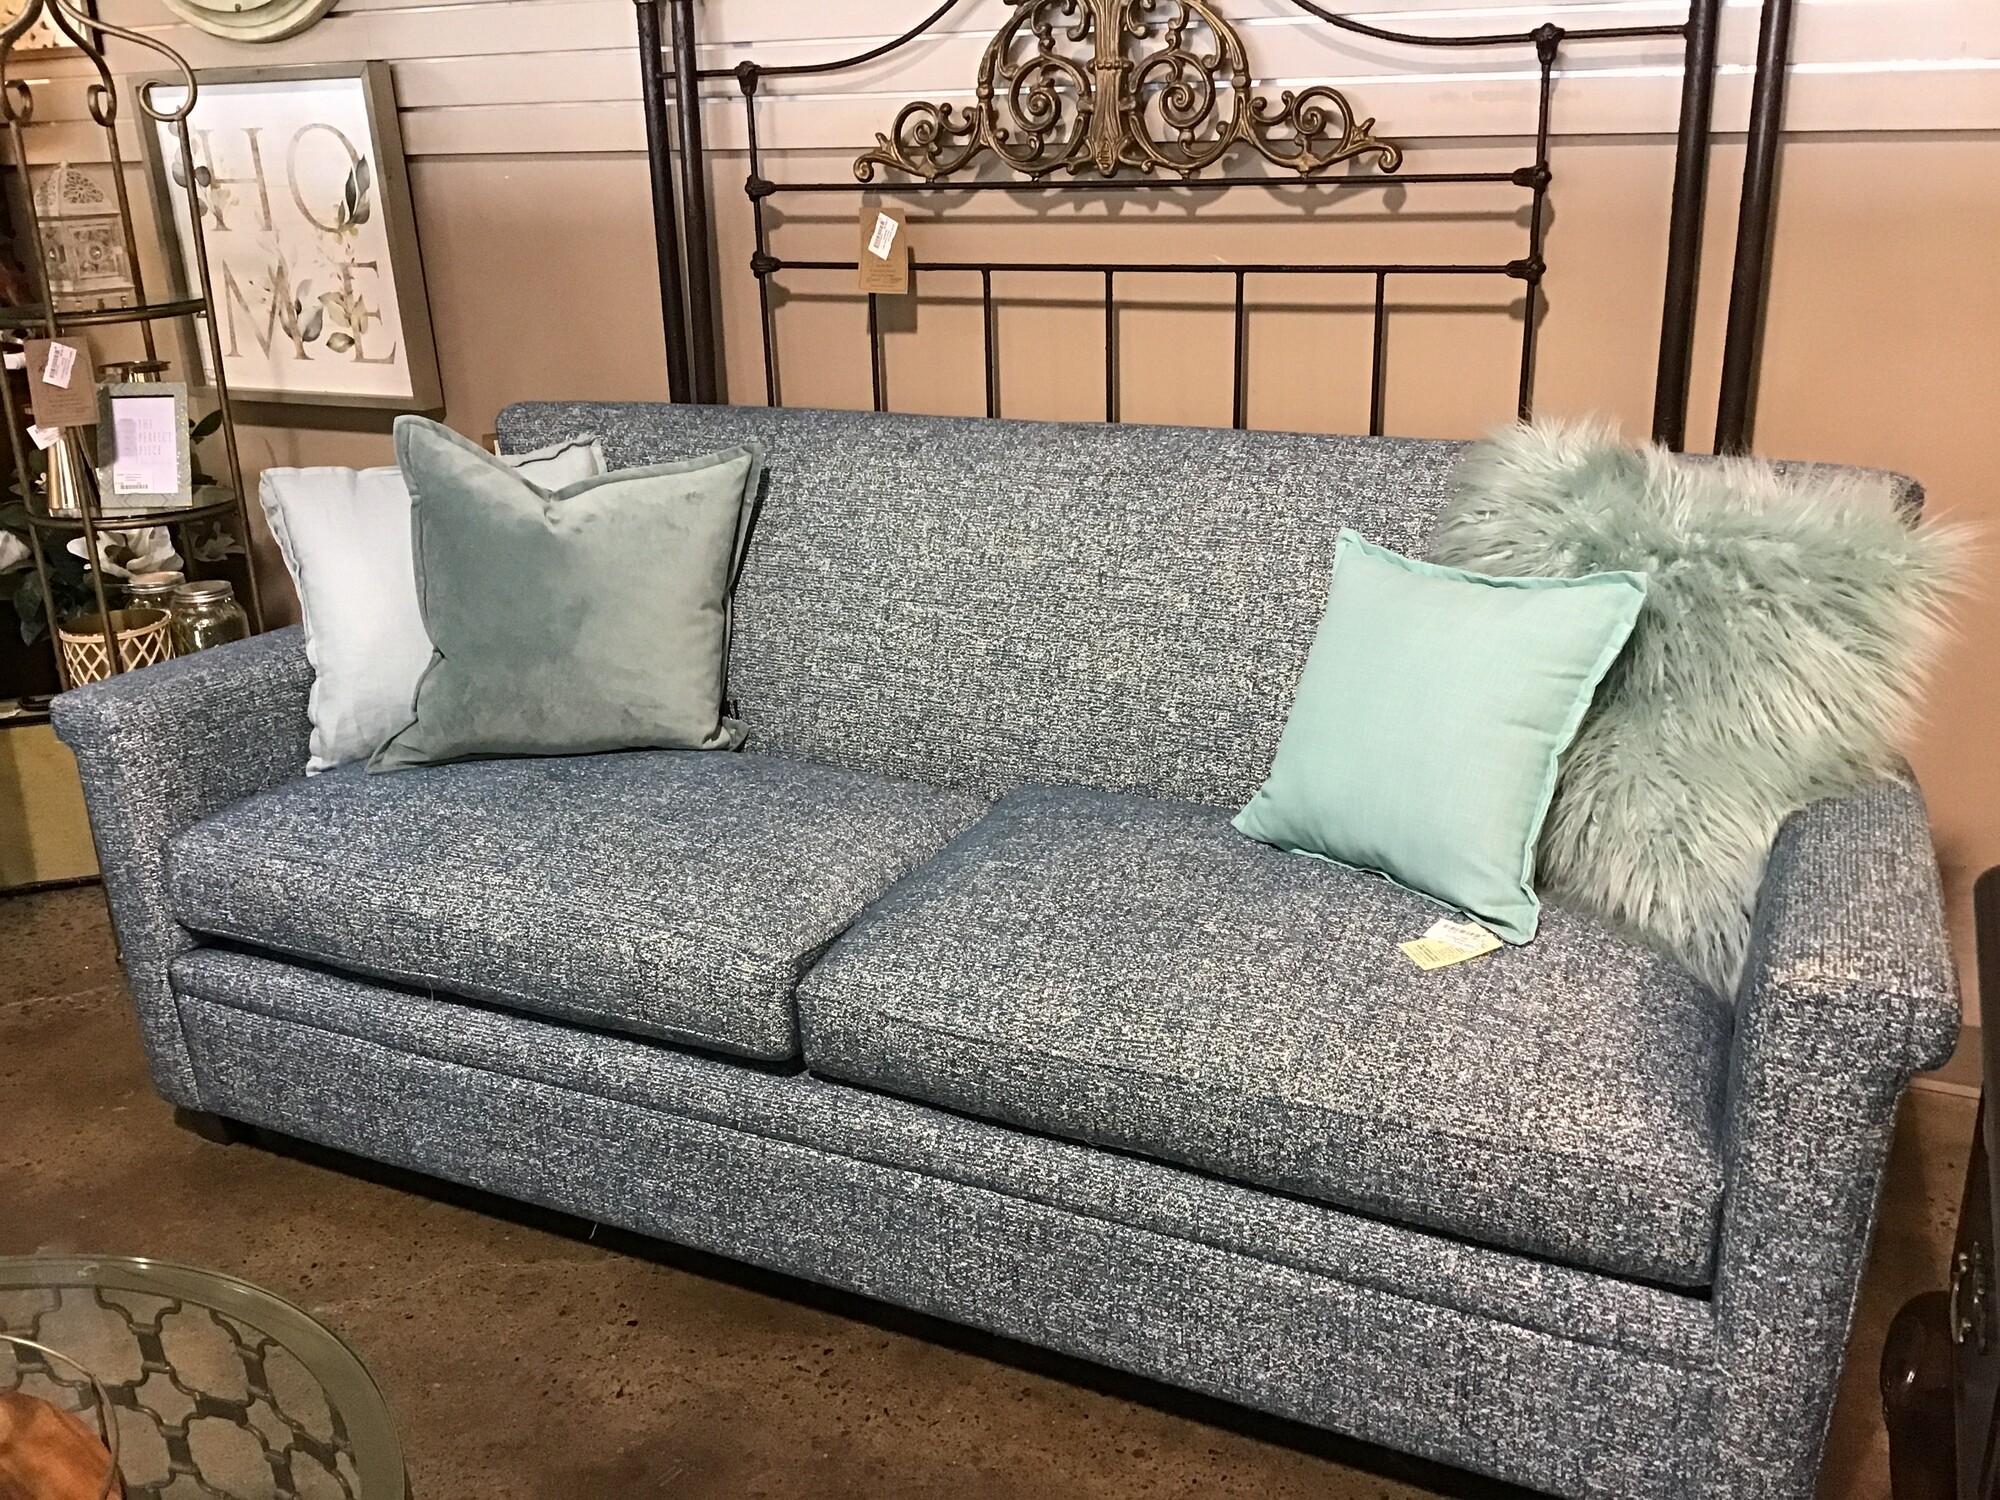 This beautiful two cushion sofa is in excellent condition and features a teal tweed fabric. The seat cushions are flippable and zip off for cleaning. This sofa is not only beautiful to look at, but is is comfortable, too!
Dimensions are 84 in x 36 in x 35 in